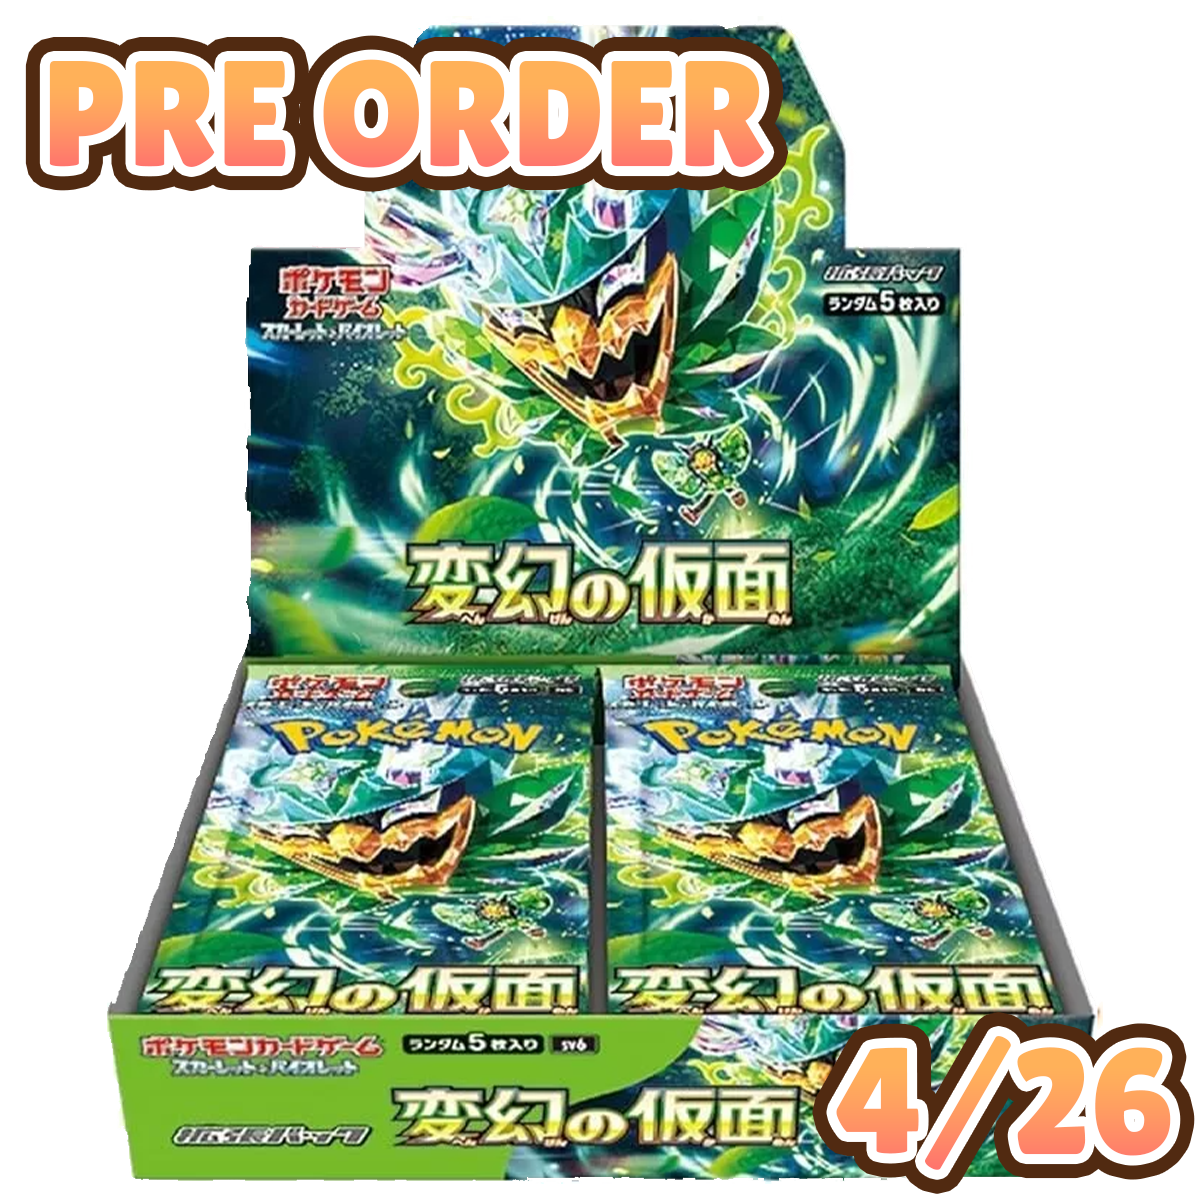 Japanese Mask of Change Booster Box 4/26 Release